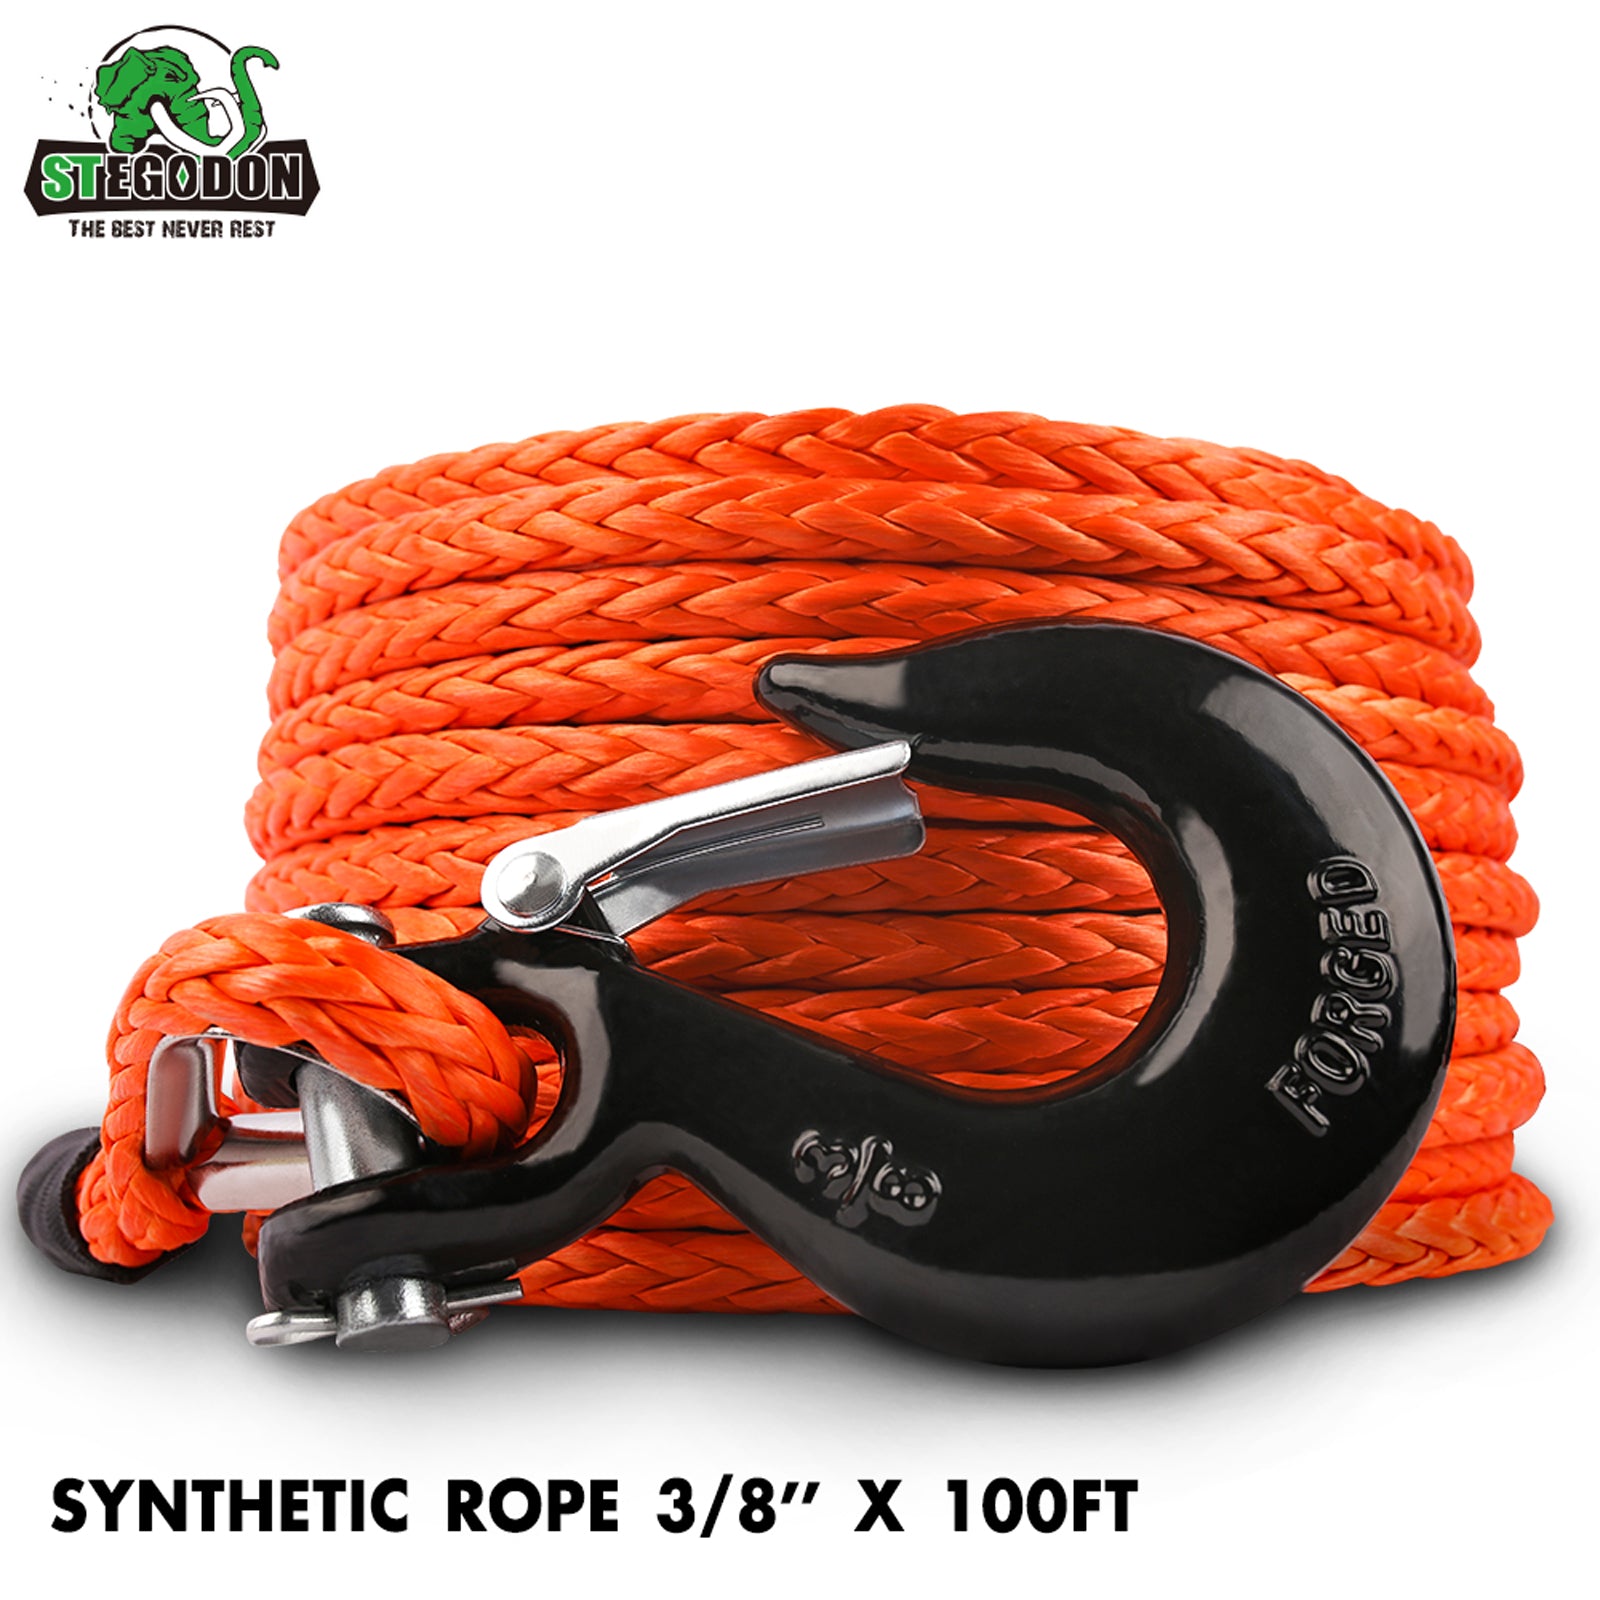 STEGODON 3/8 x 100ft Synthetic Winch Rope 23,809lbs Dyneema Winch Cable Line with Hook and Sleeve Protection Car Tow Recovery Cable for 4WD Off